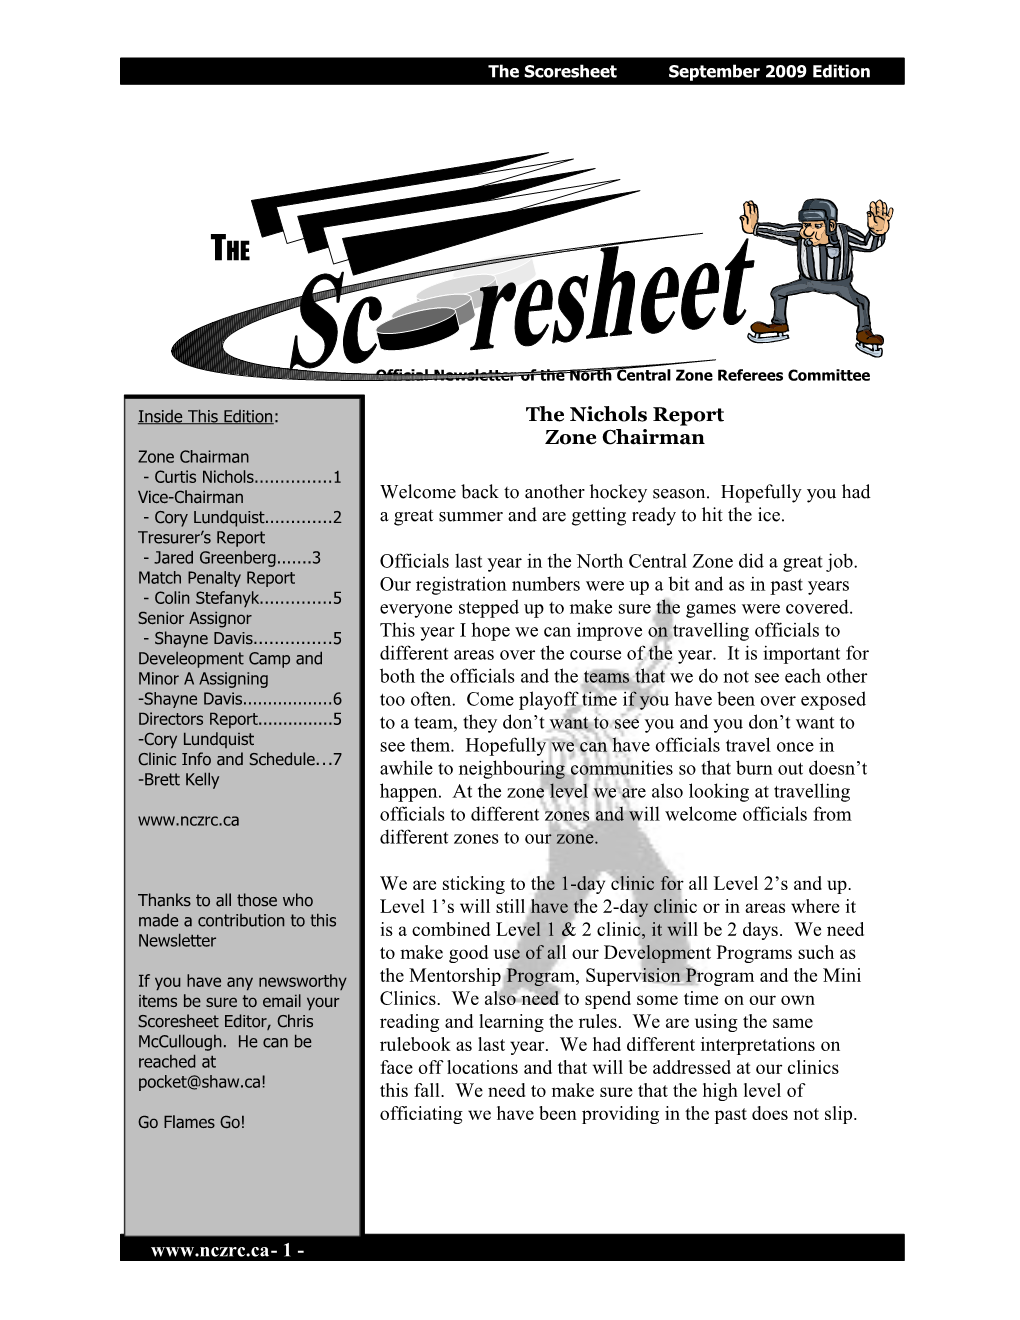 Official Newsletter of the North Central Zone Referees Committee